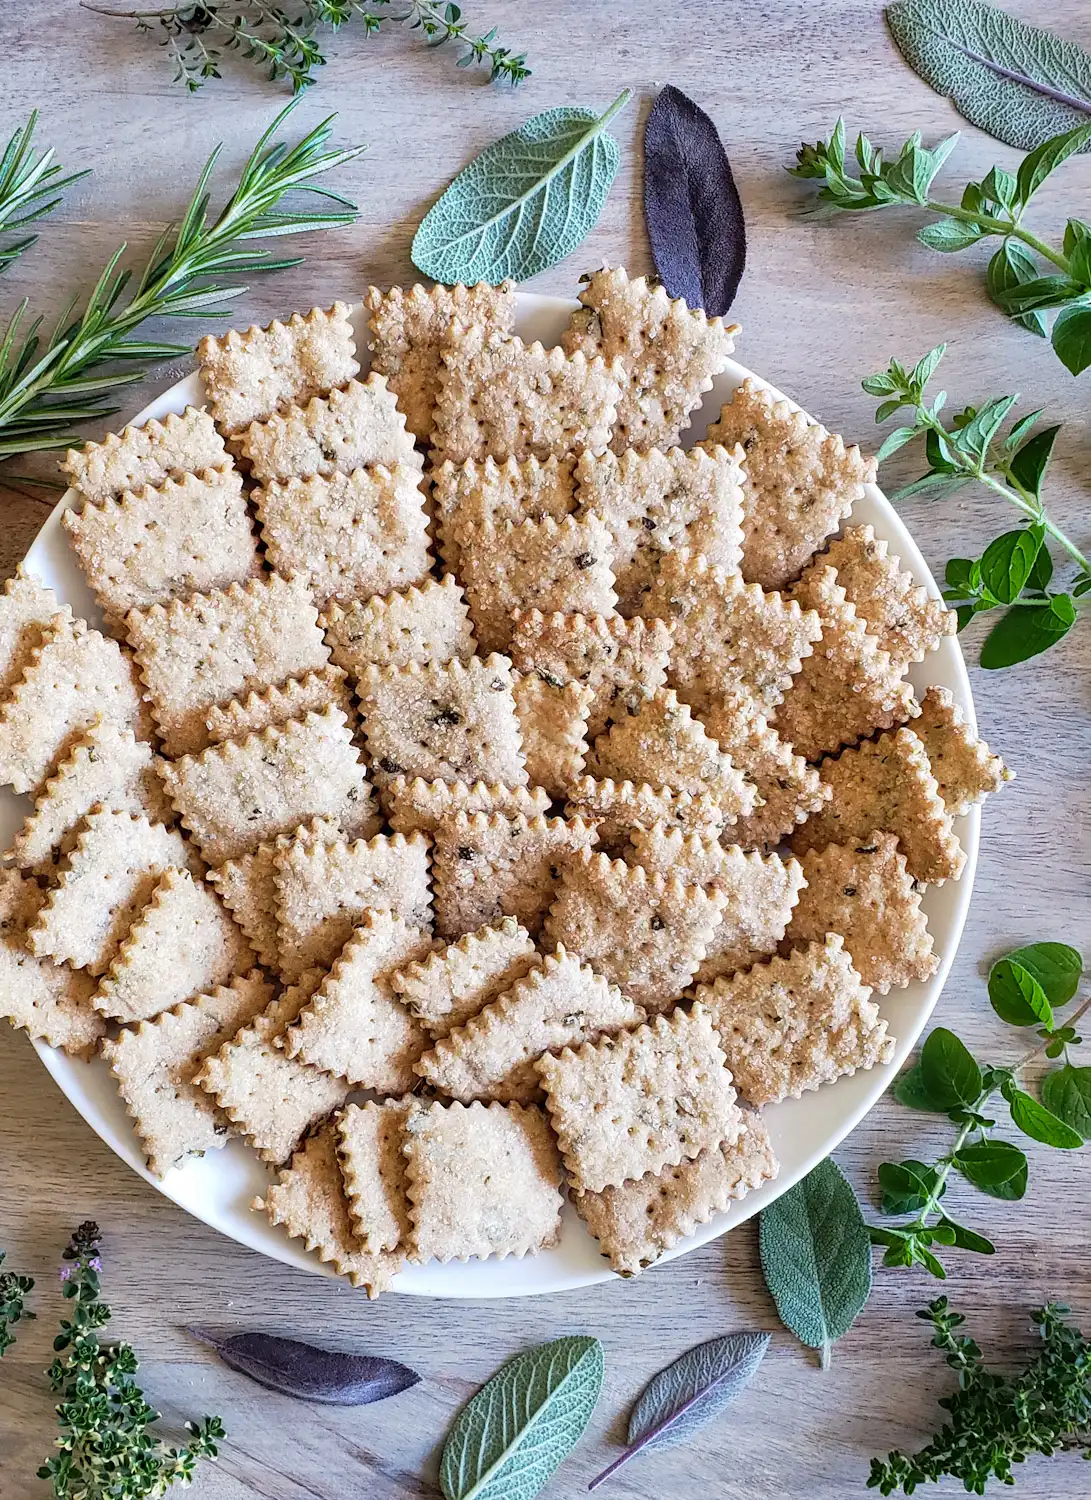 A large plate full of sourdough discard crackers. Flakes of salt and pieces of herbs are visible on the crackers. A variety of fresh herbs garnish the area surrounding the plate. 